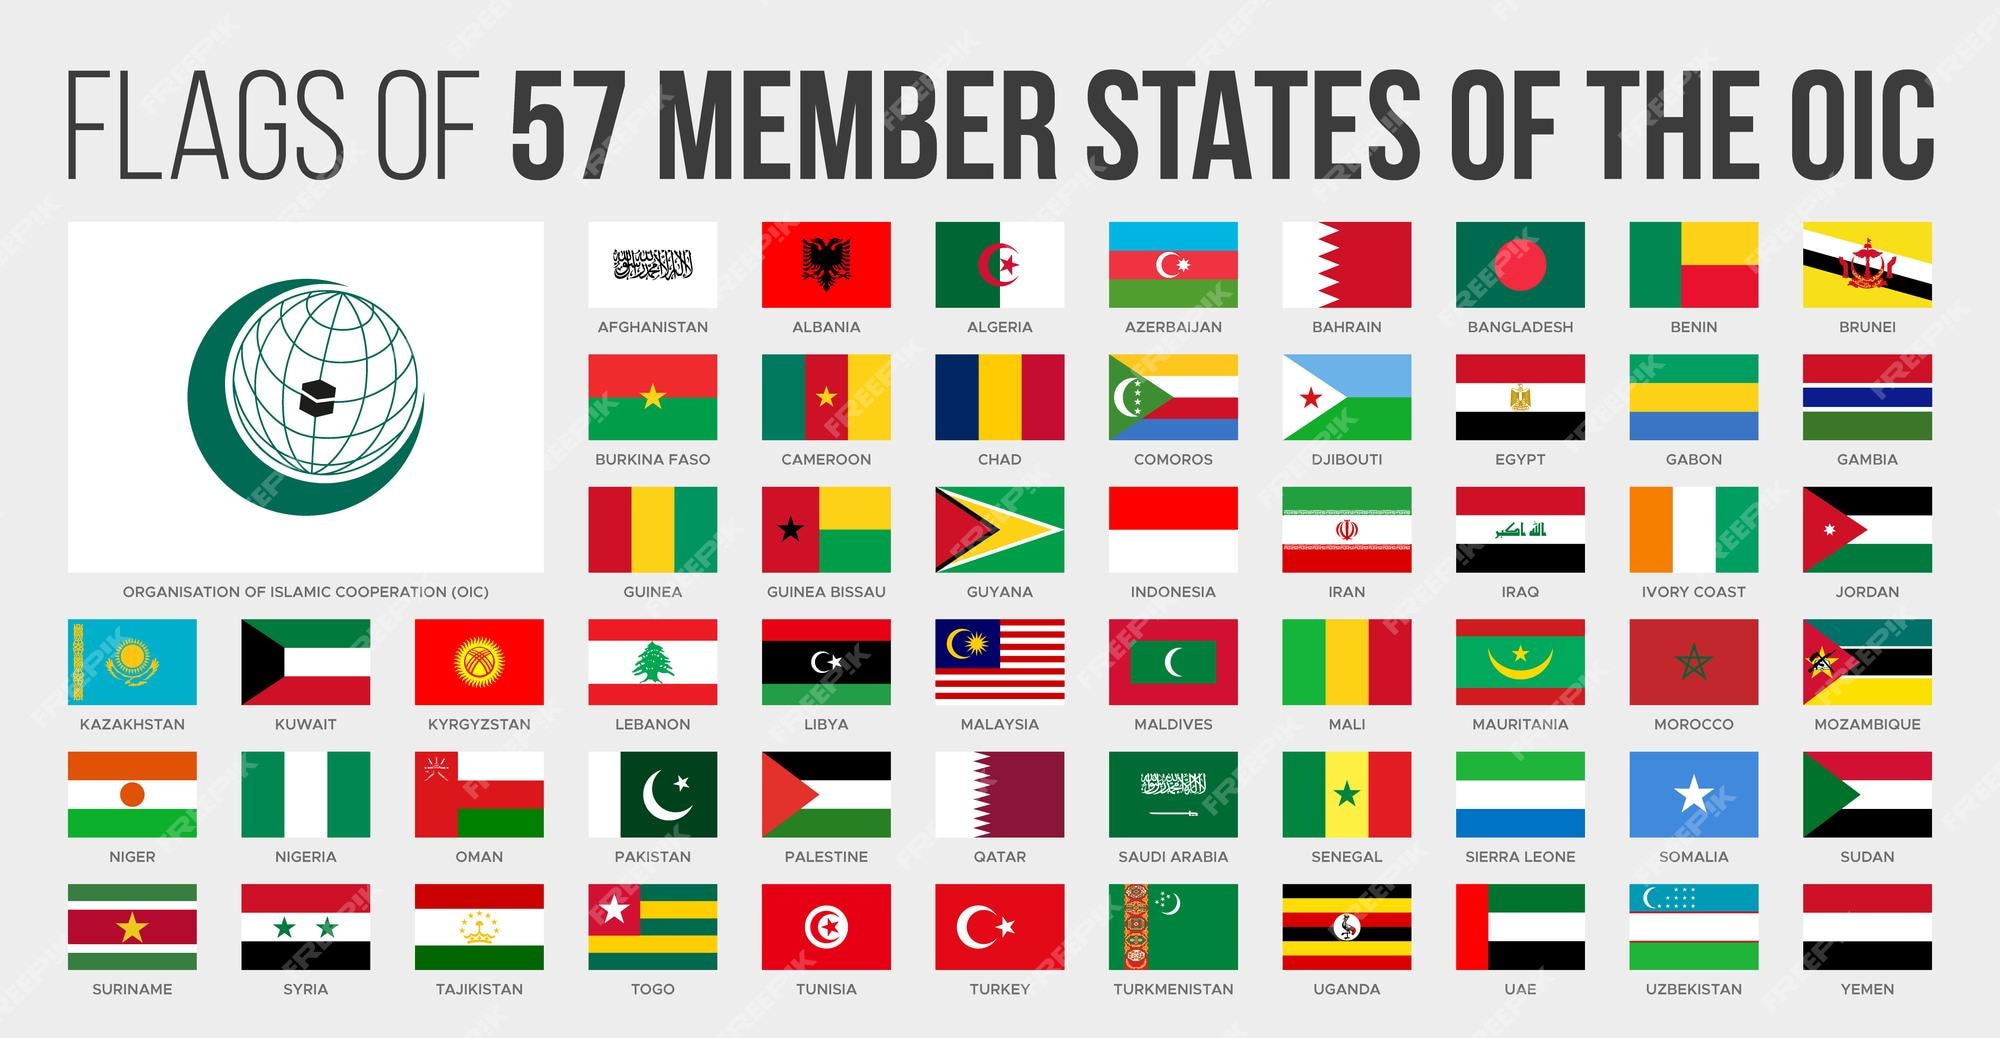 oic-member-states-flags-flat-national-flags-countries-oic-organization-islamic-cooperation_75010-1127.jpg